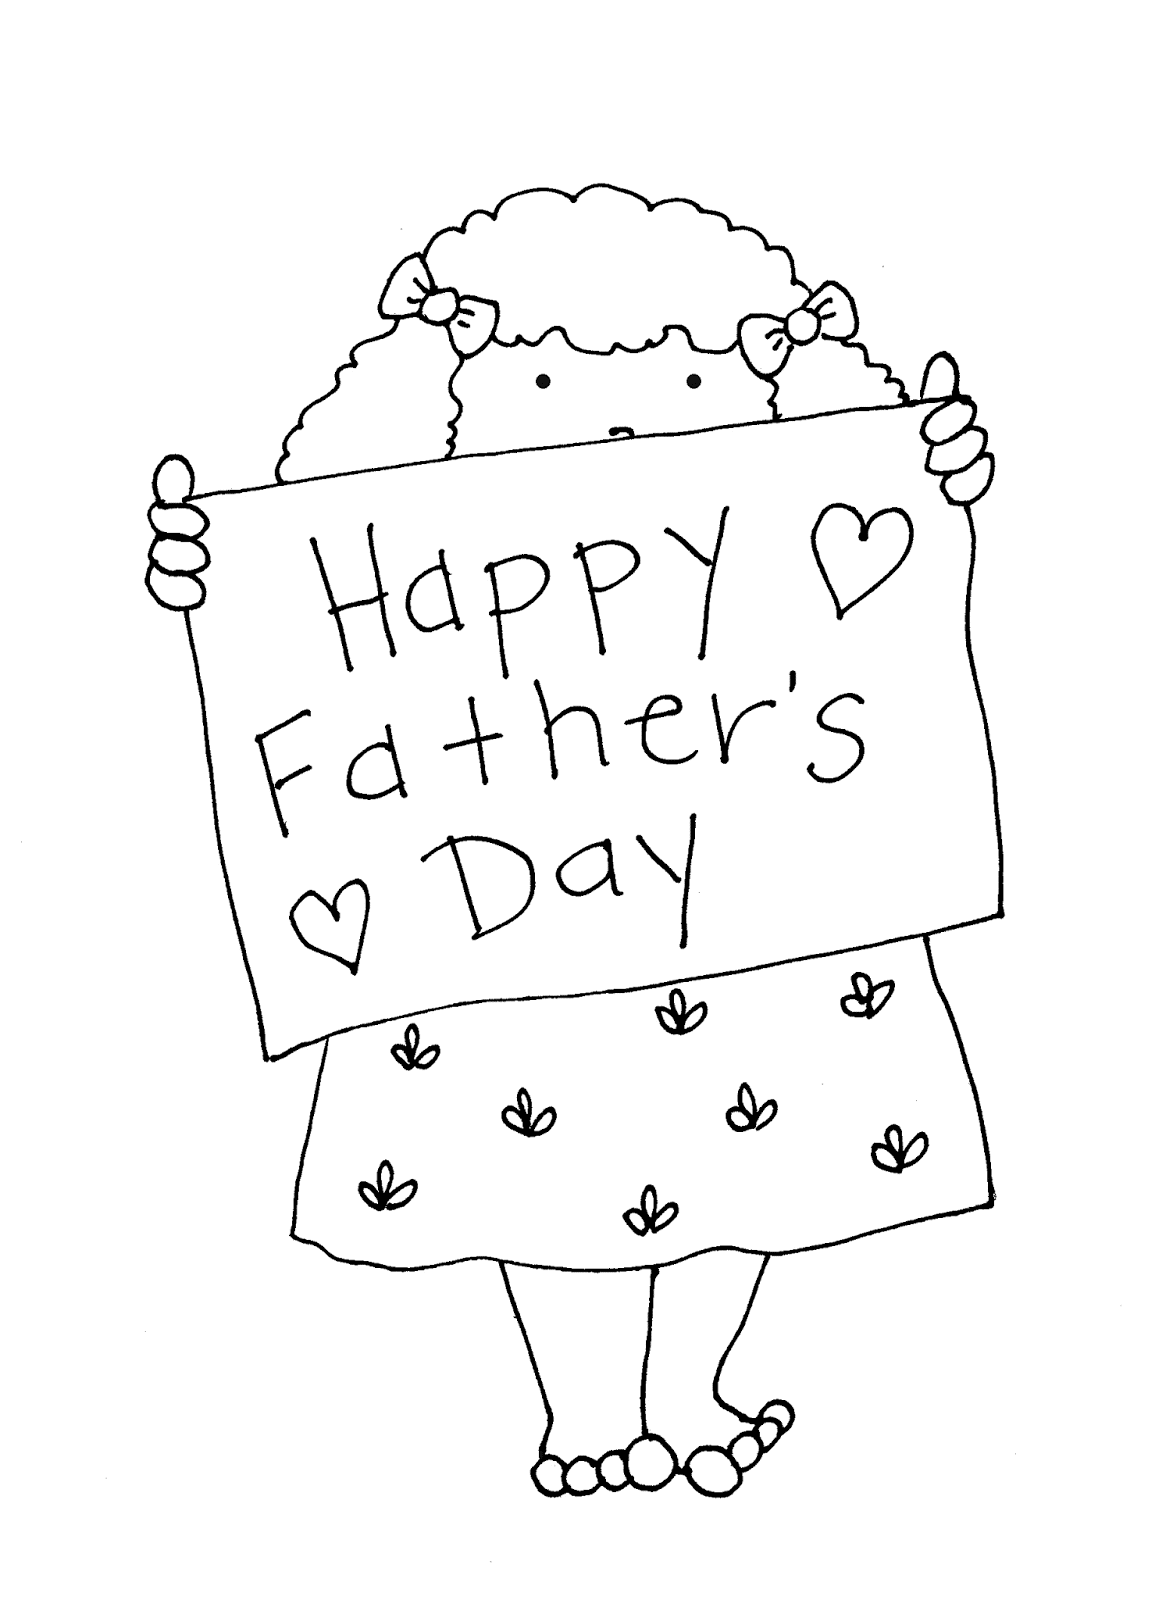 Happy fathers day drawing Pic